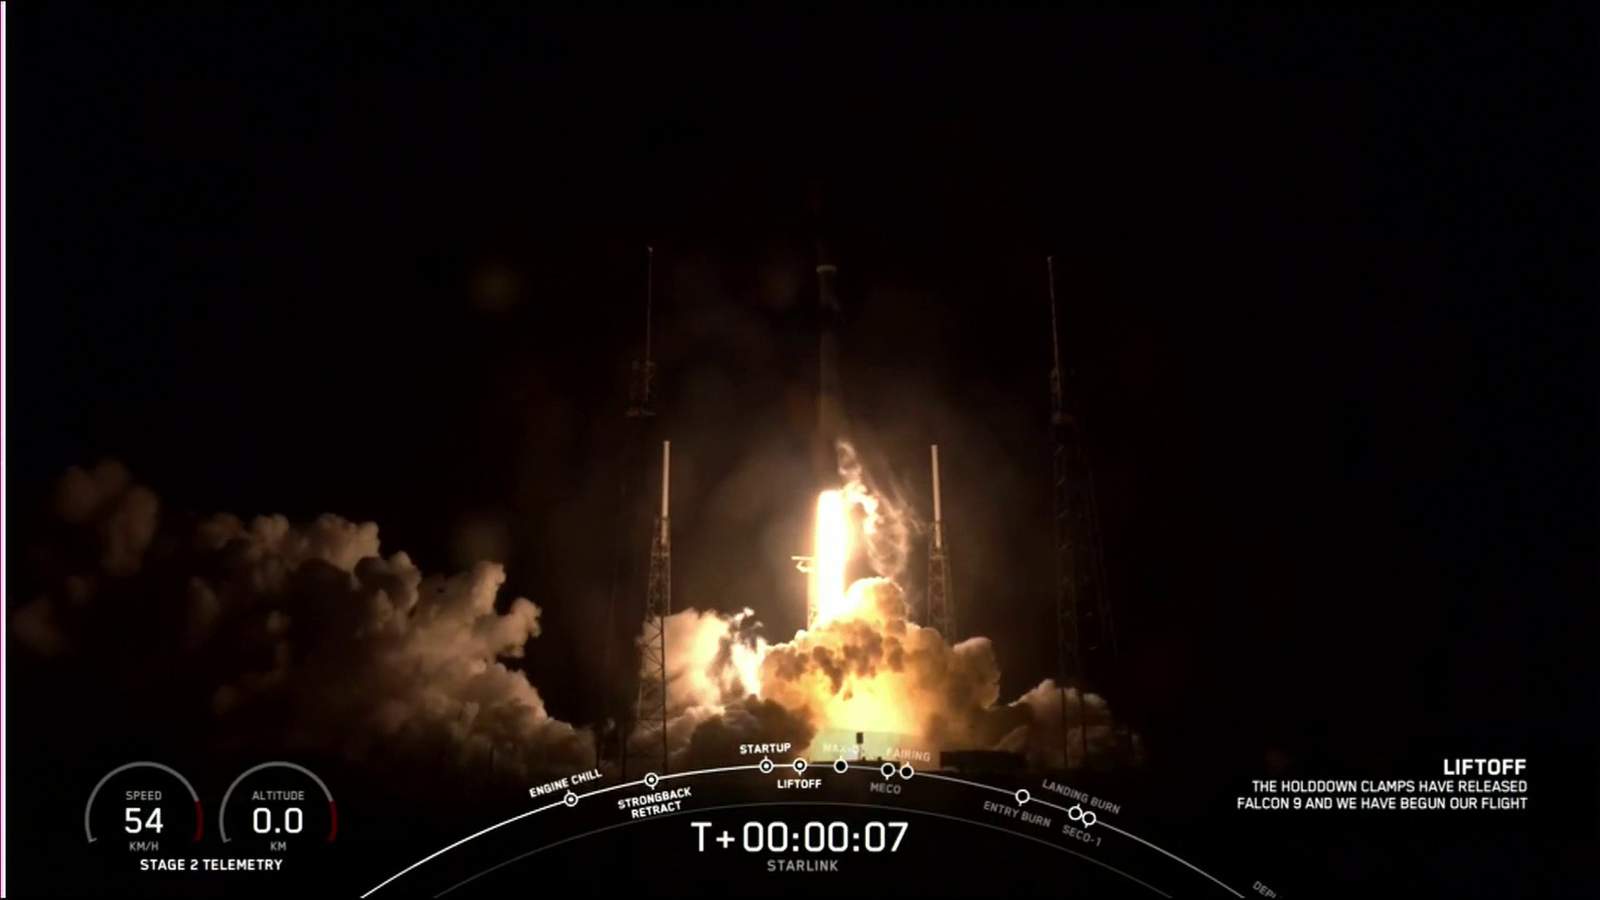 REWATCH: SpaceX launches another round of Starlink satellites from Cape Canaveral